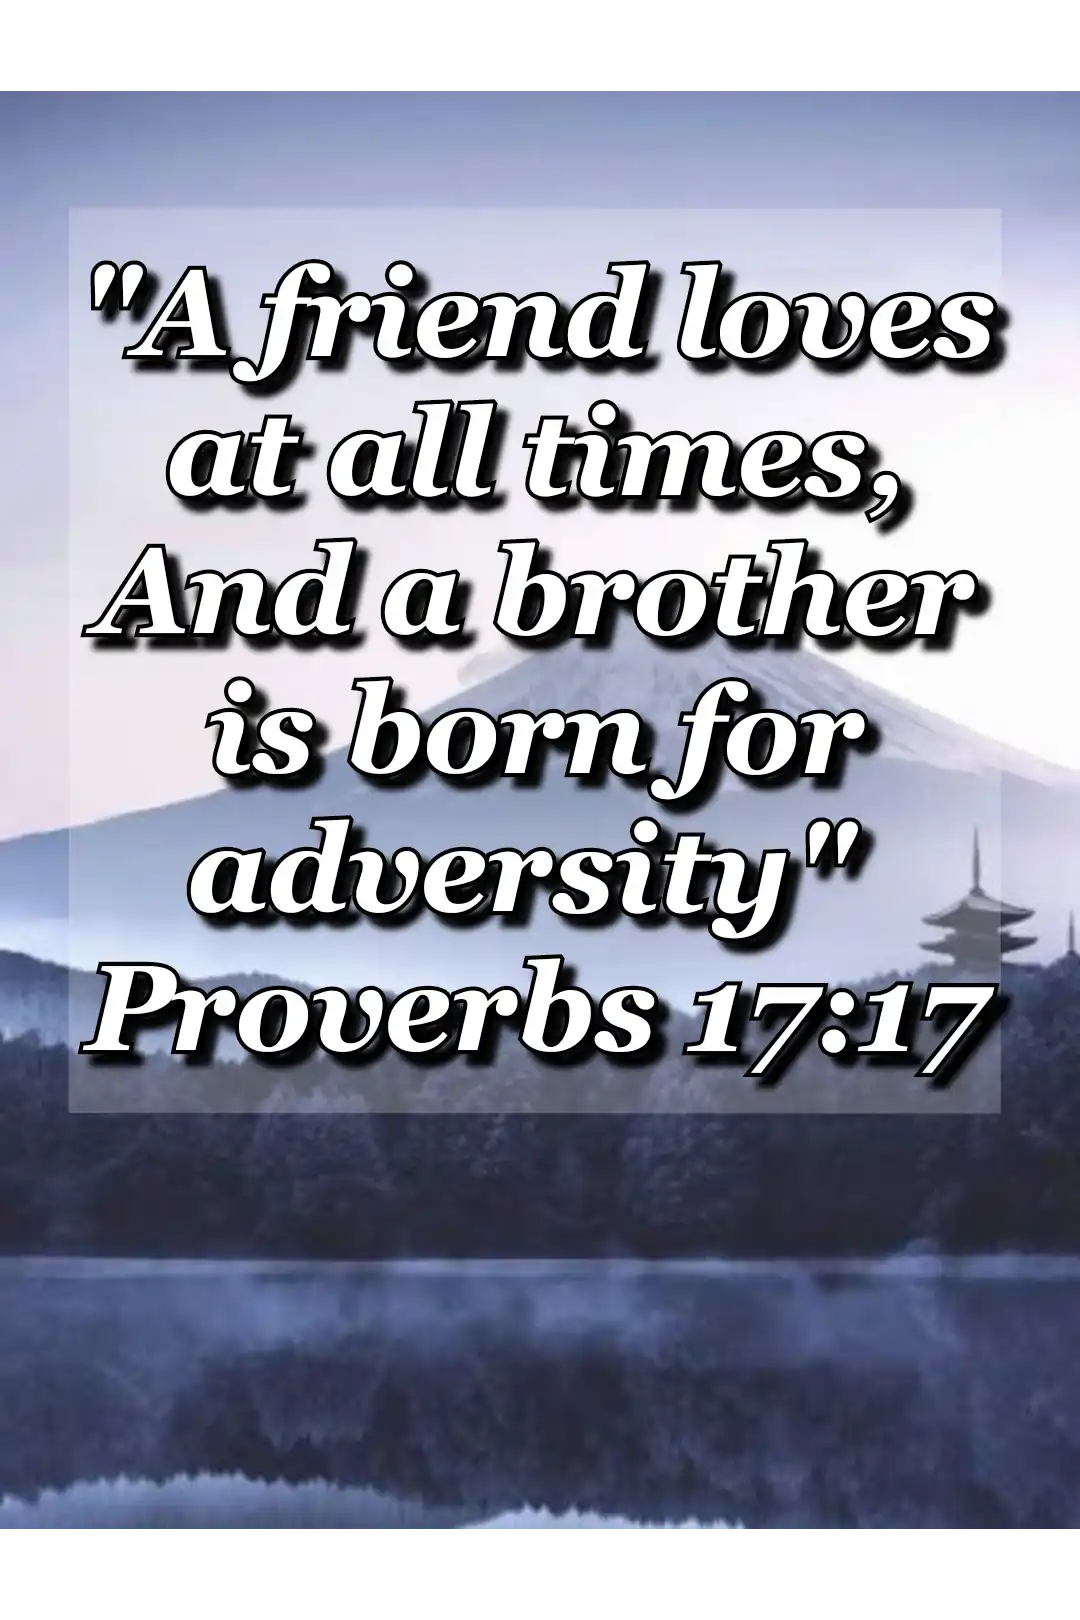 bibile-verses-about-friendship (Proverbs 17:17)